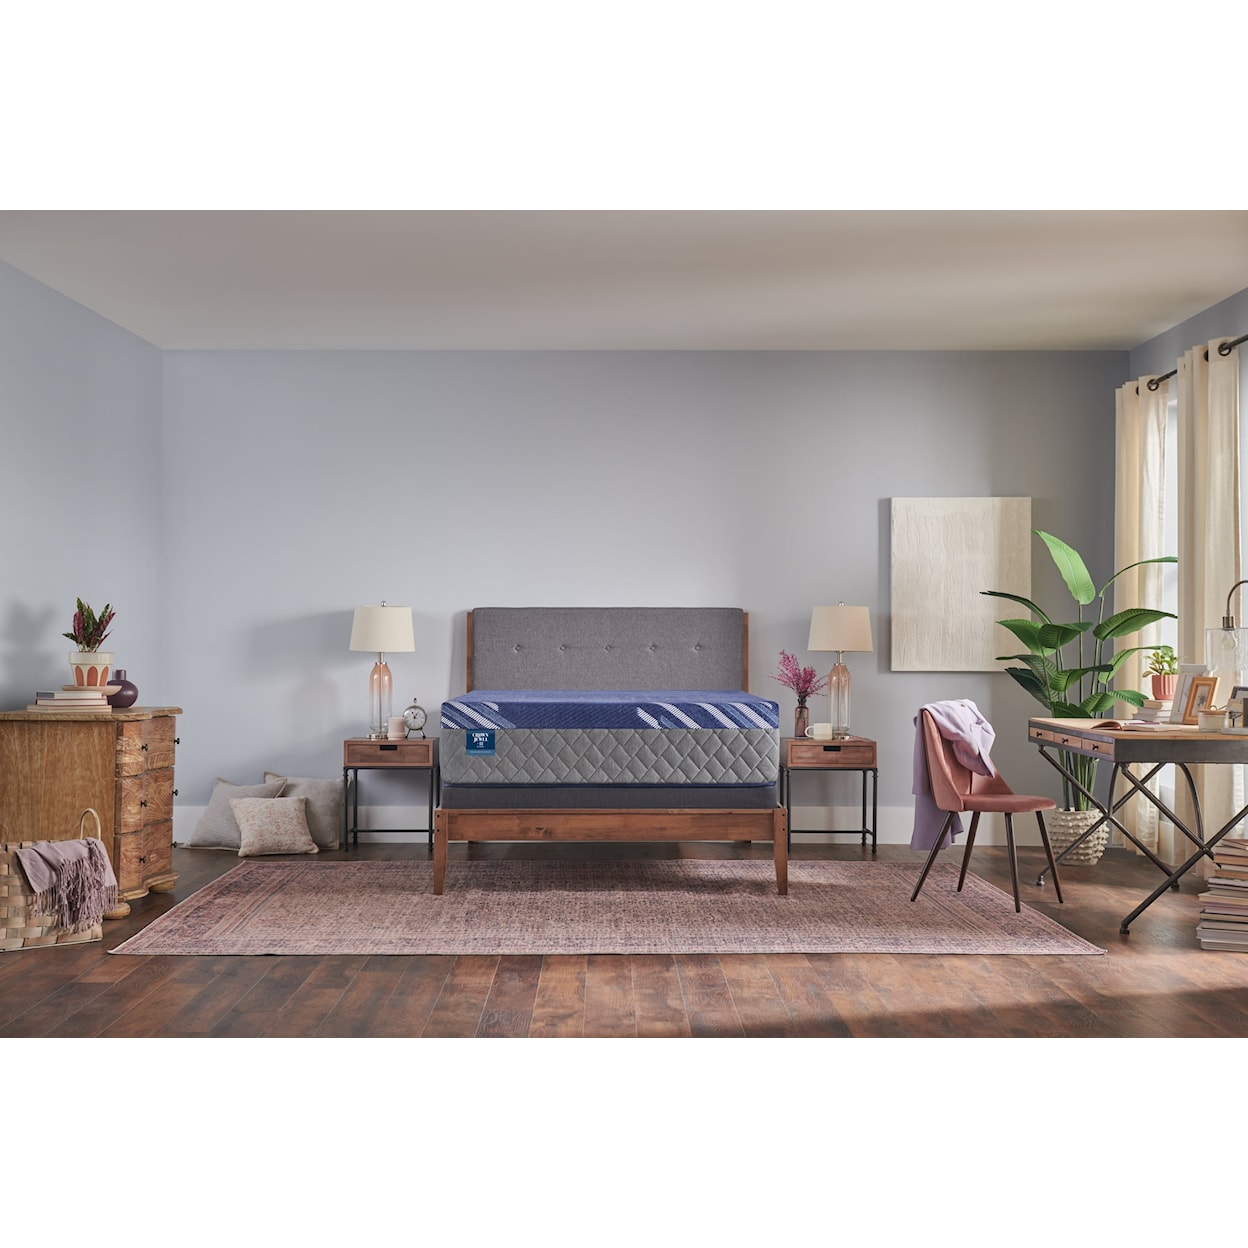 Sealy Crown Jewel H8 Eighth & Park Soft Twin Mattress